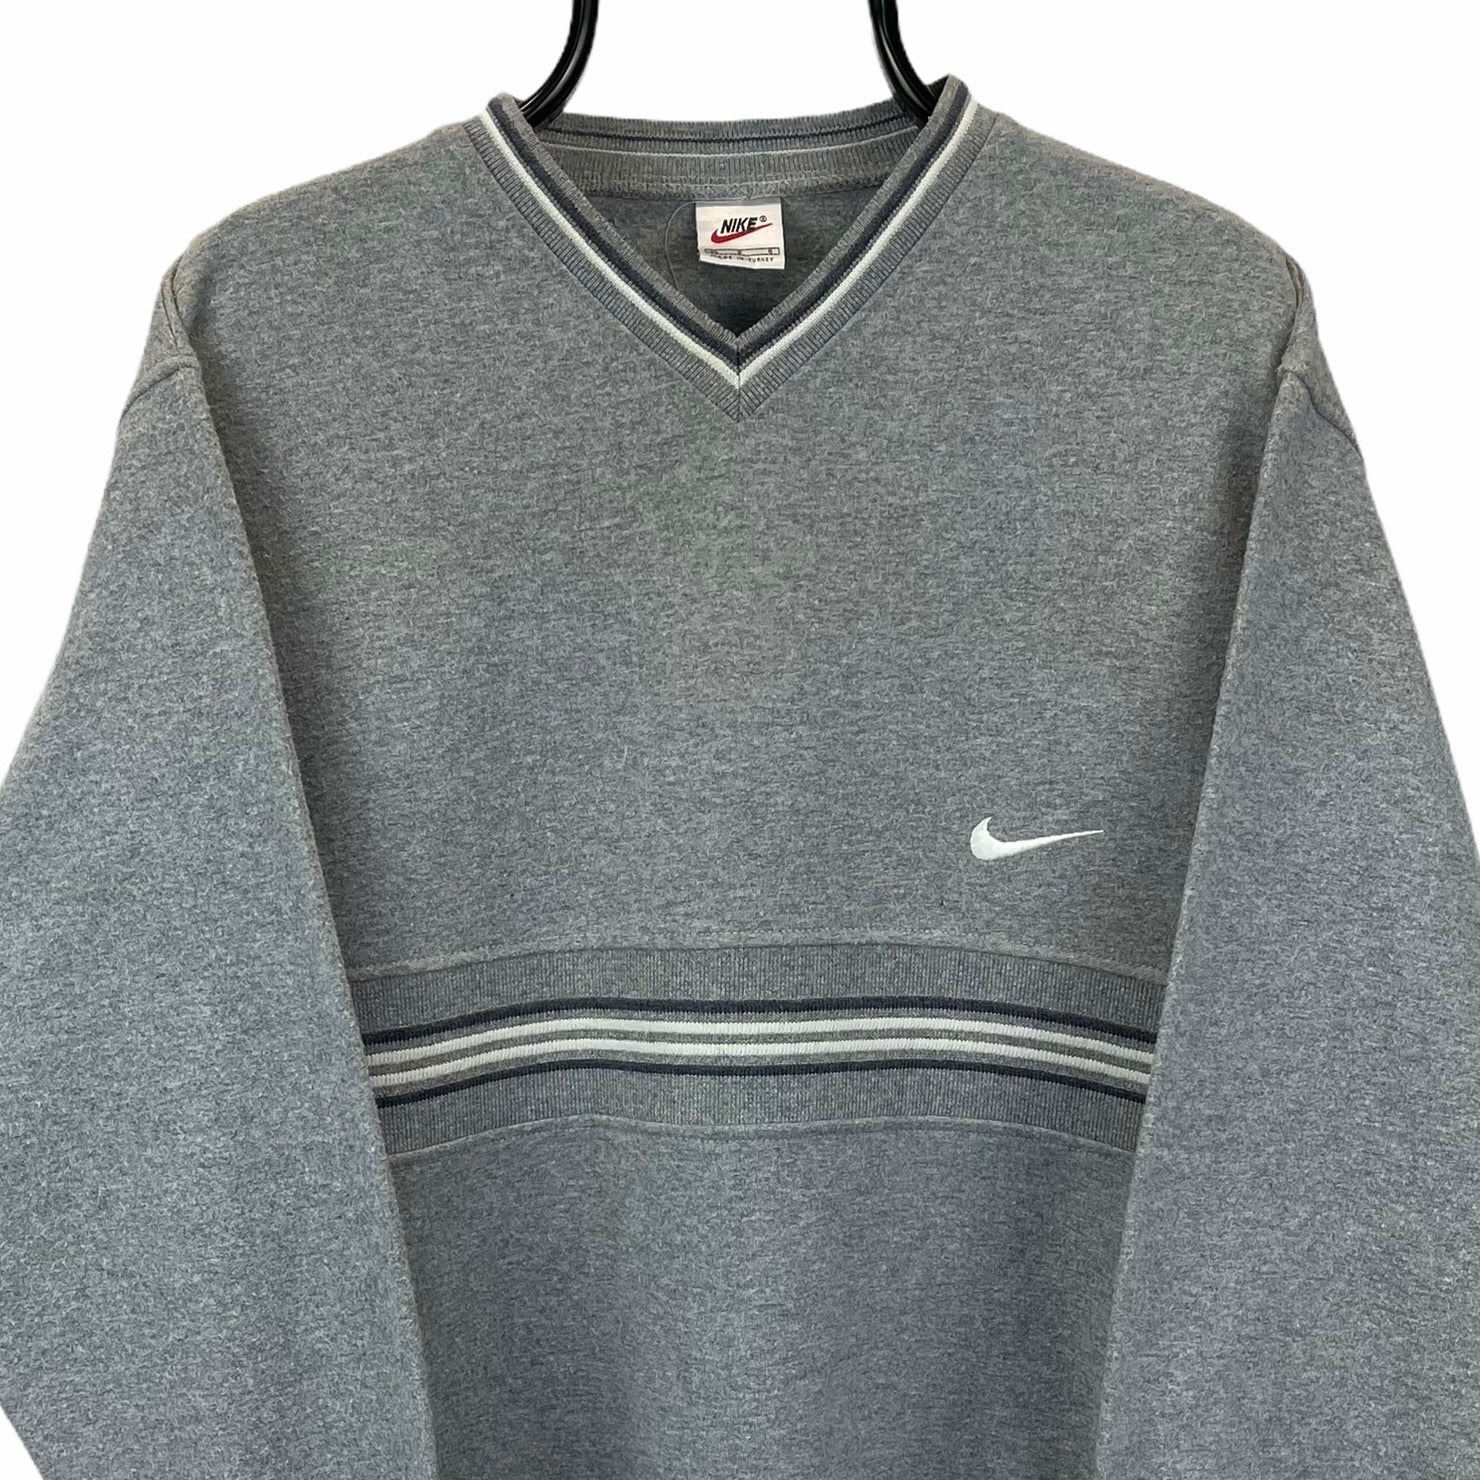 VINTAGE 90S NIKE EMBROIDERED SMALL SWOOSH SWEATSHIRT IN GREY - MEN'S LARGE/WOMEN'S XL